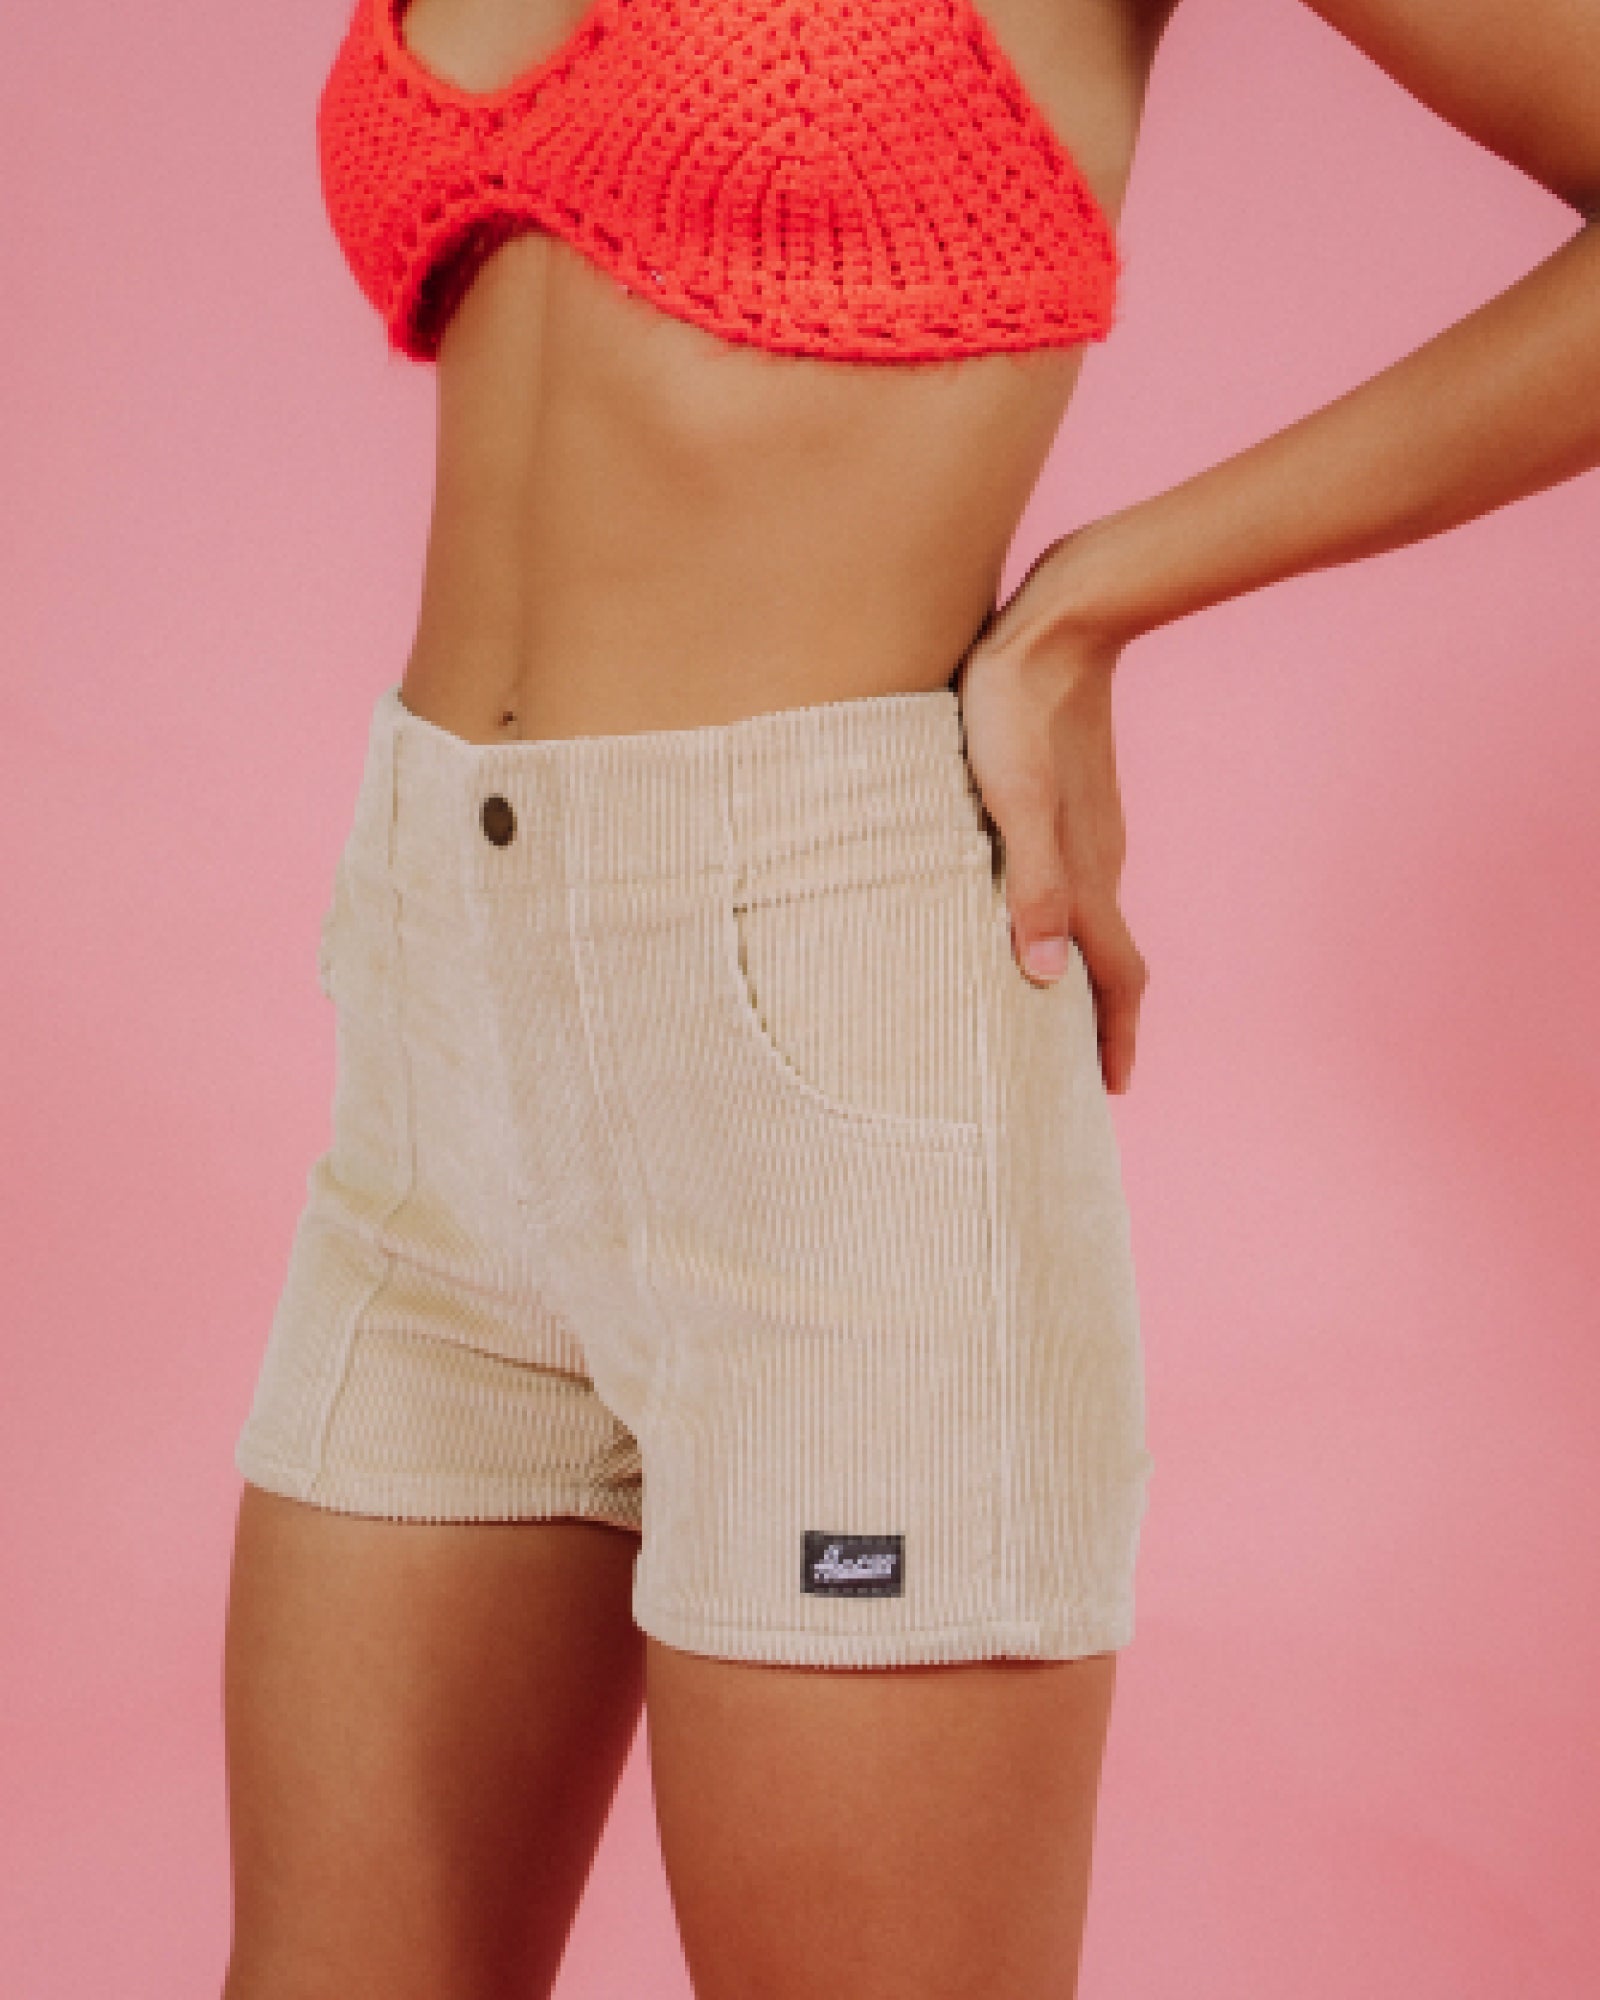 Do+Be Fit and Flare Shorts - Hot Pink Small